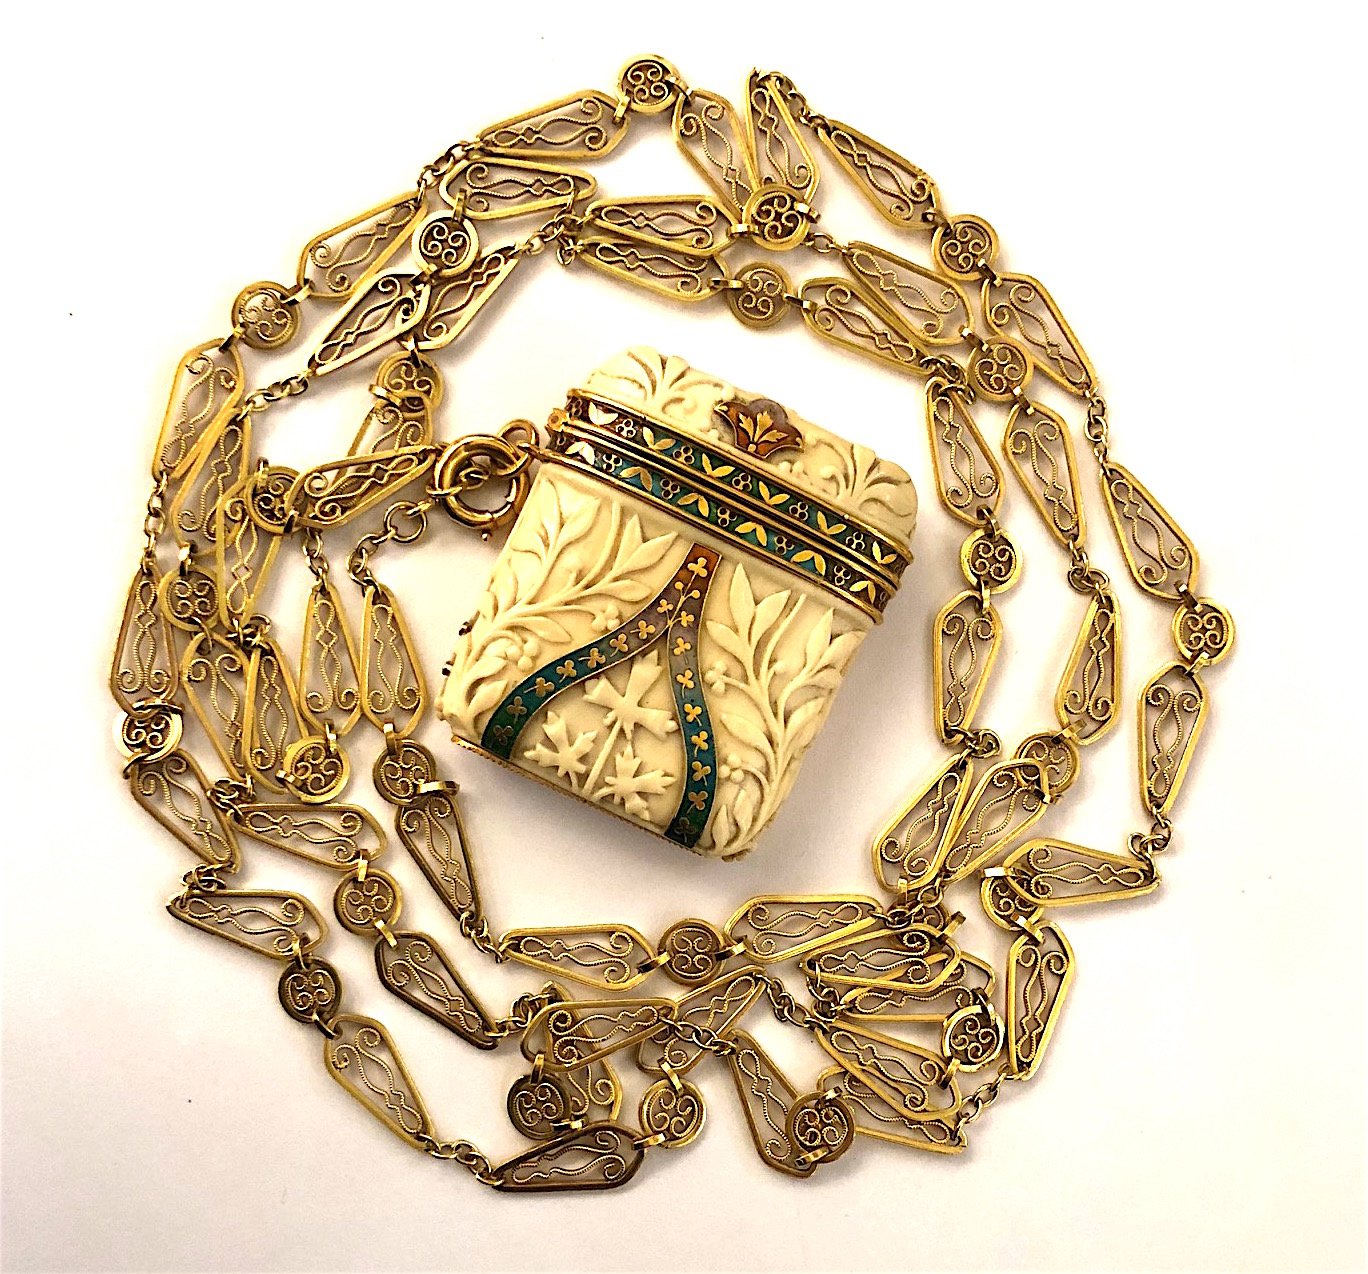 Tiffany & Co., New York Neo-Gothic “Vesta” case with 18k gold mountings and polychrome champleve enamel details on a “bone” covered case with hand carved foliate details on an 18k gold French “Belle Epoque” long chain, Tiffany & Co. Vesta signed: Tiffany & Co. (2x), LS in a diamond cartouche, mark for Georges Le Sache, 346 rue St.-Honore, 75001, Paris, French Eagle’s head mark for 18k gold (2x), French “Belle Epoque” long chain signed: Diamond shaped makers cartouche (2x), French Eagle’s head mark for 18k gold (3x), French Rhinoceros and Weevil 18k gold assay marks for small pieces, c. 1880